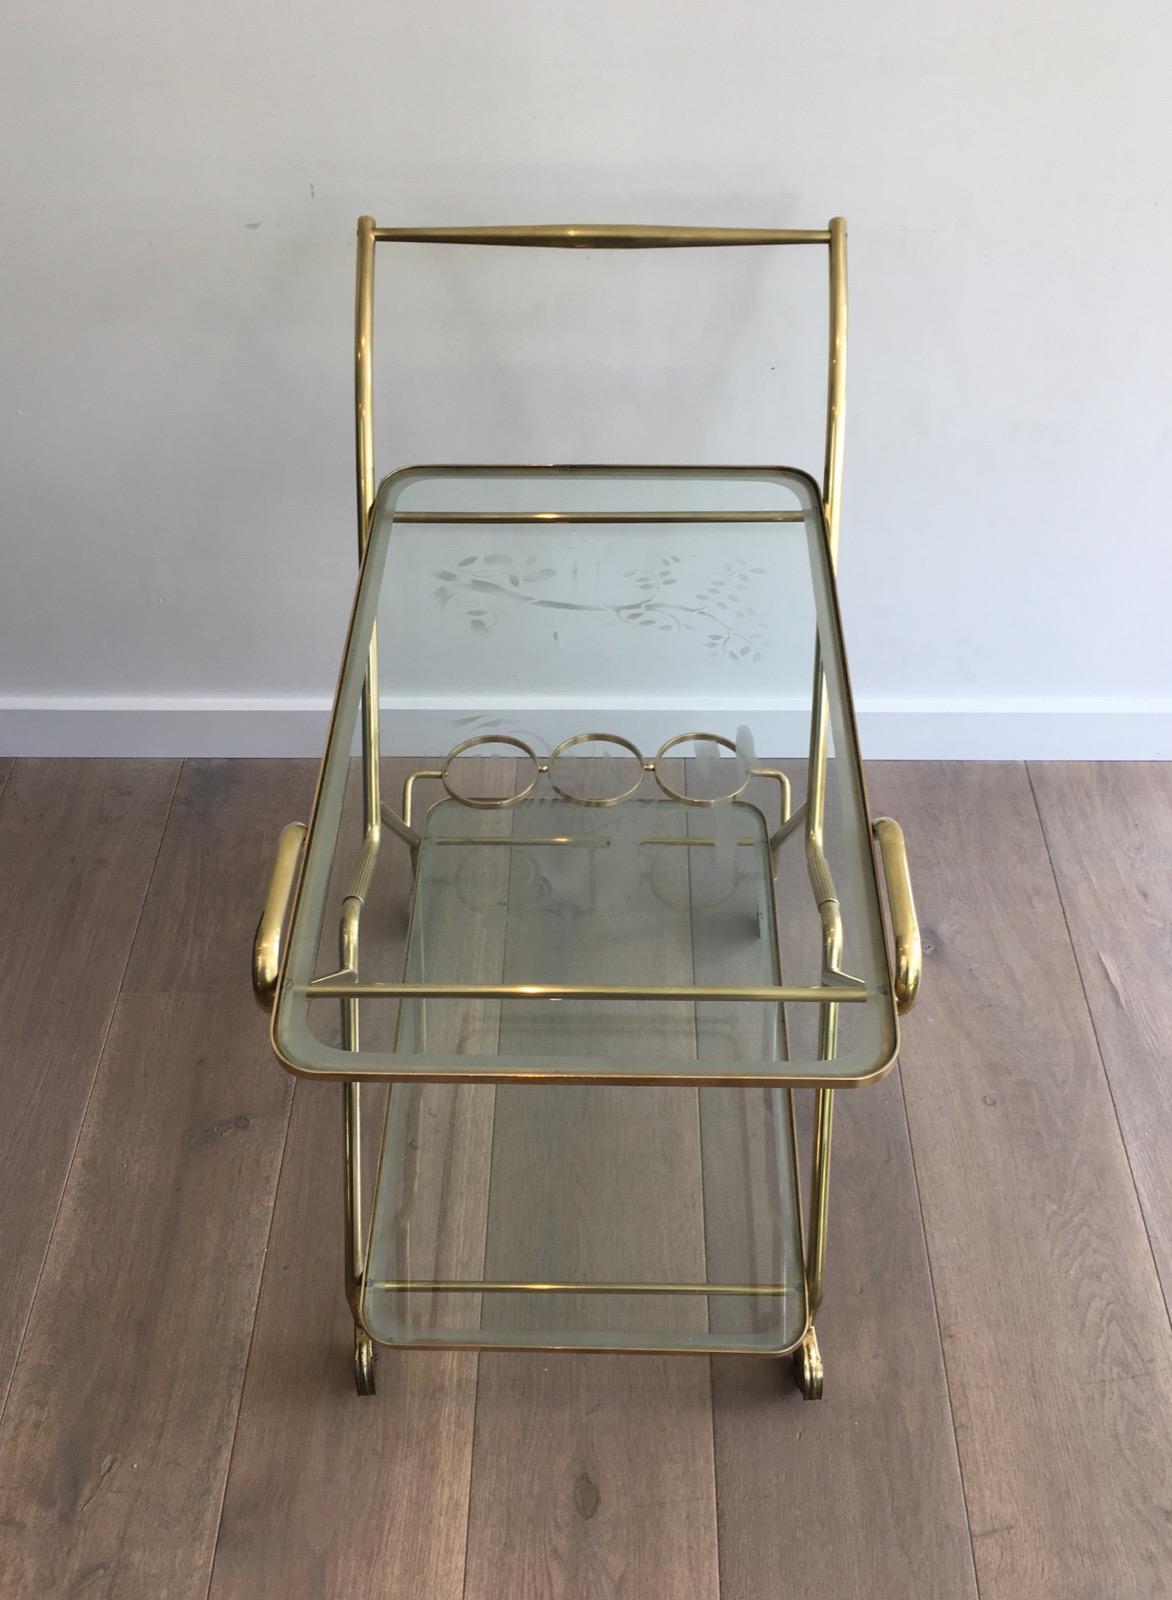 Interesting Italian Design Brass and Engraved Glass Drinks Trolley, circa 1950 For Sale 6